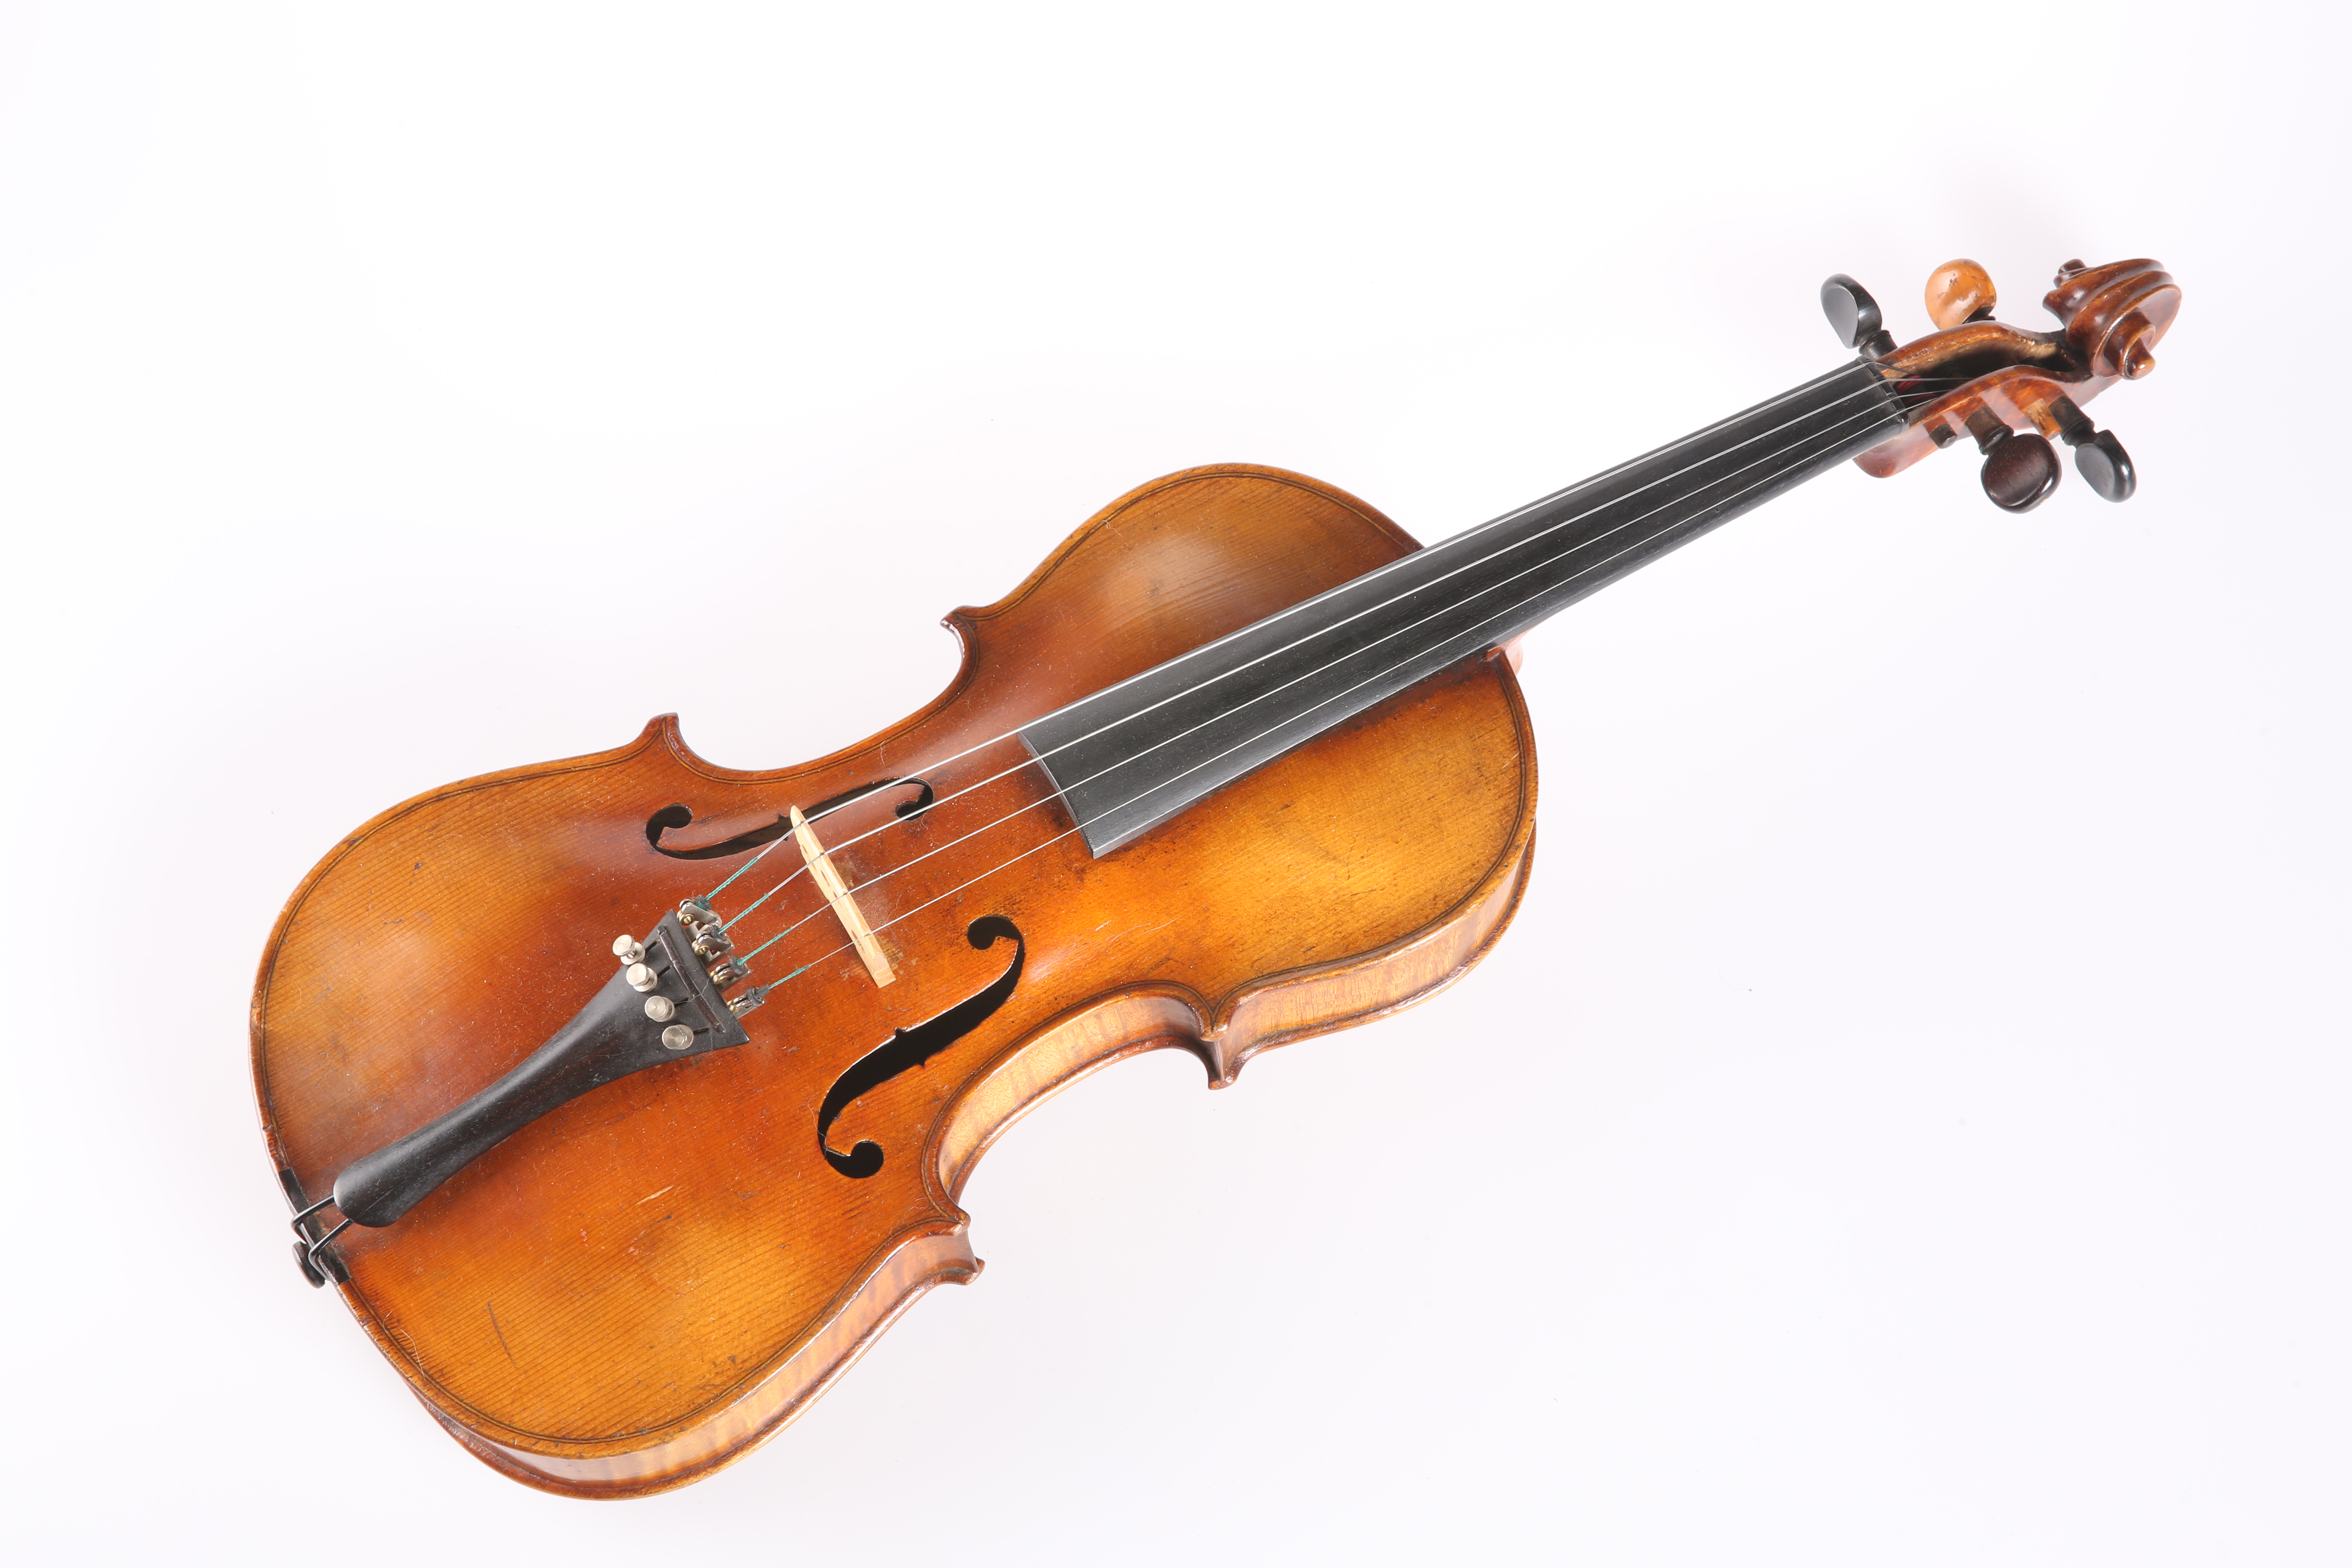 A 14" BODY VIOLIN OF THE EARLY 20TH CENTURY - Image 3 of 3